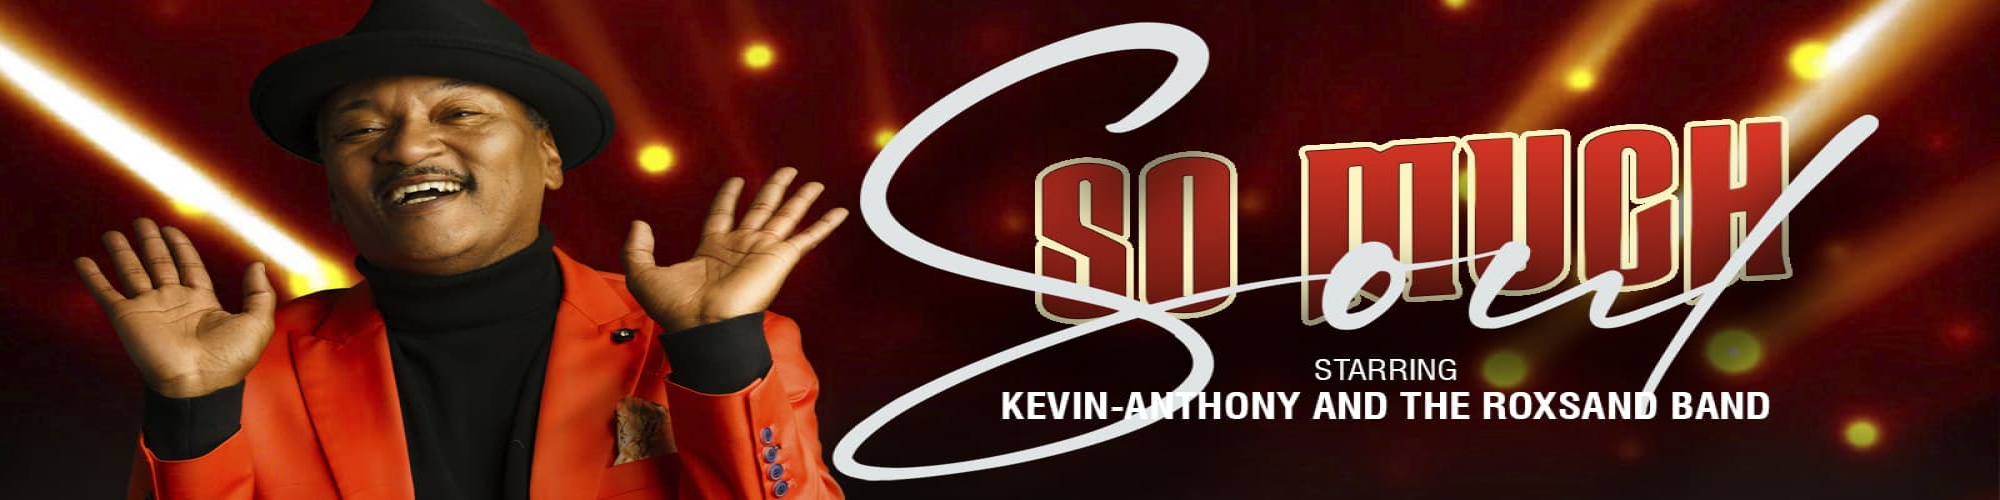 SO MUCH SOUL, starring Kevin-Anthony (Red Room)